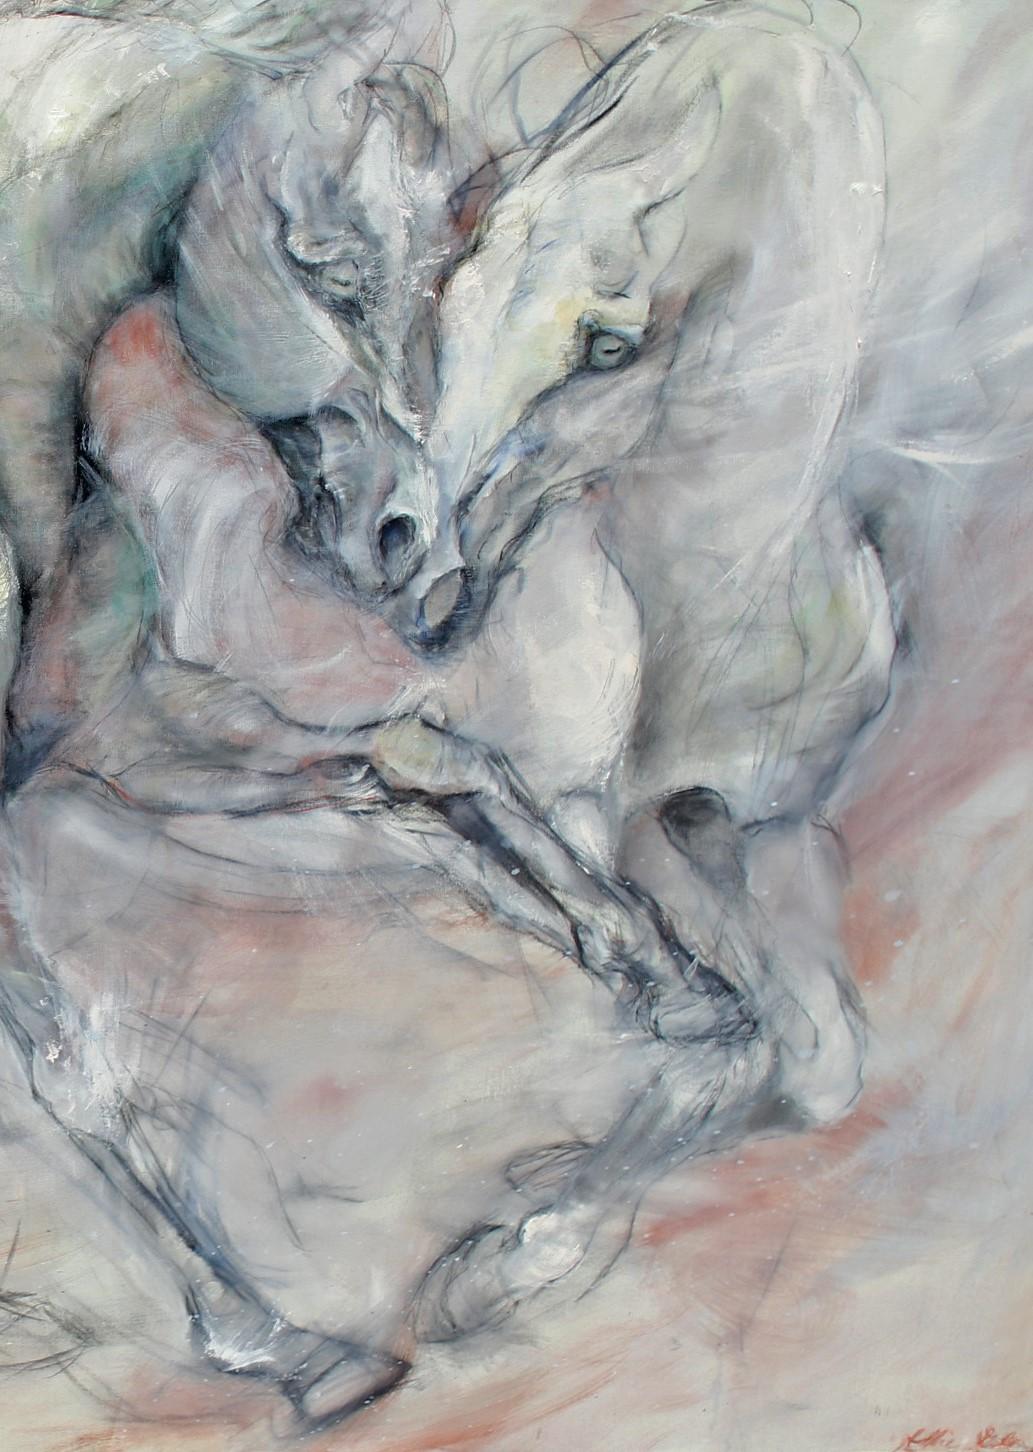 Ethereal Emotions Elegance Neutral Colors a Contemporary Gestural Horse Painting (en anglais)  en vente 2